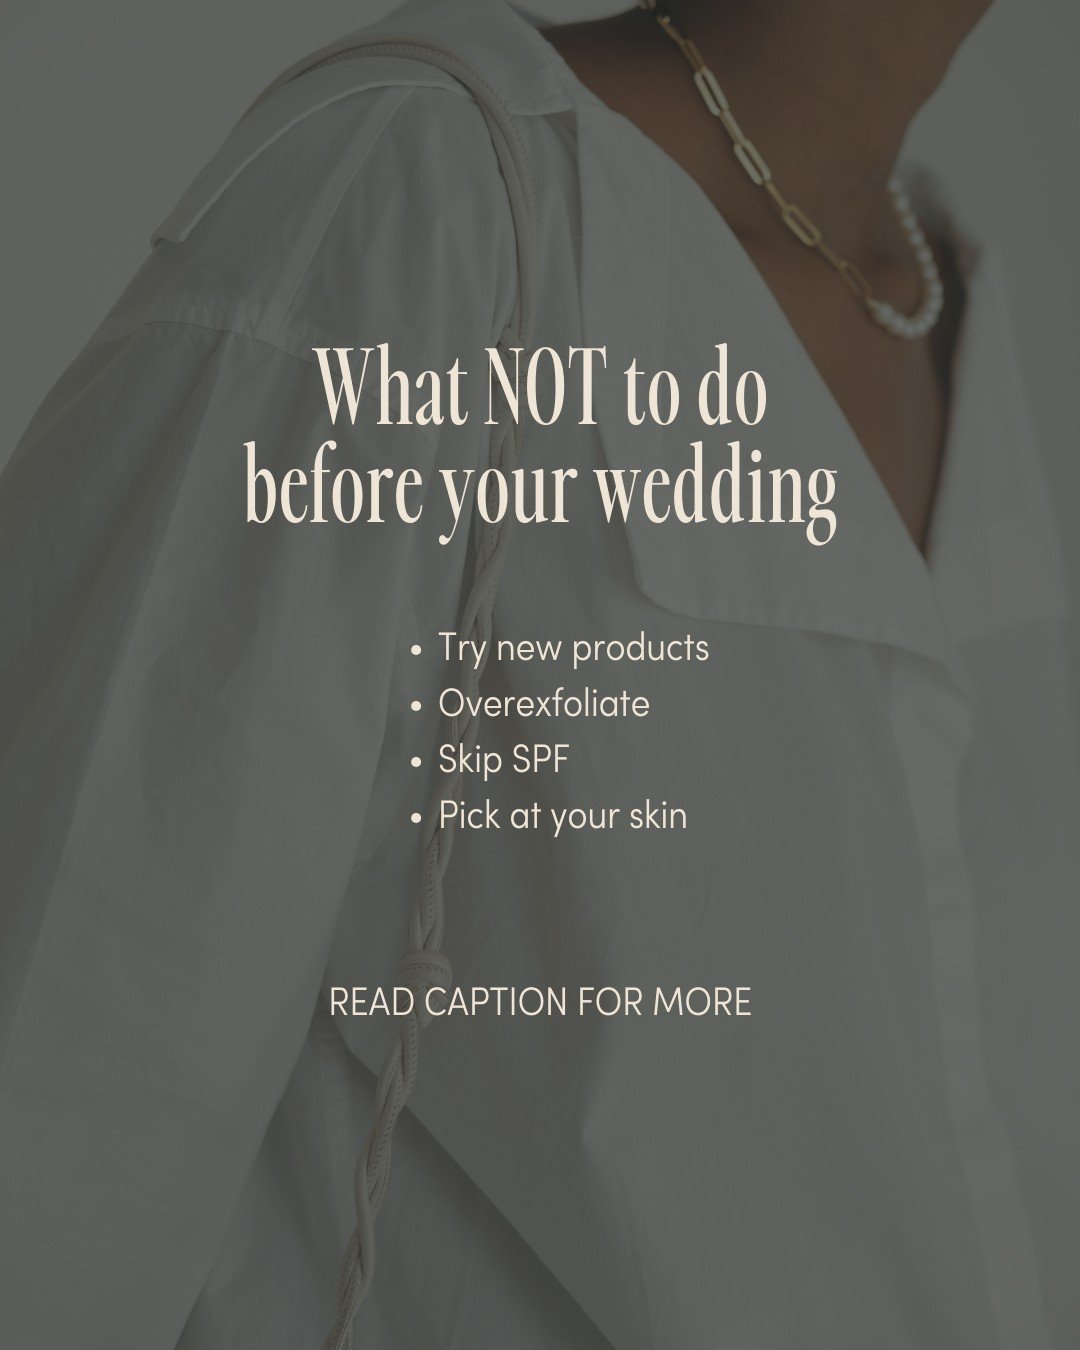 Skipping your regular facials is a big no no before your wedding - not only for your skin but for your stress levels! Keeping your stress down is key to healthy skin as well as making sure you are hydrating properly and not consuming too much sugar o